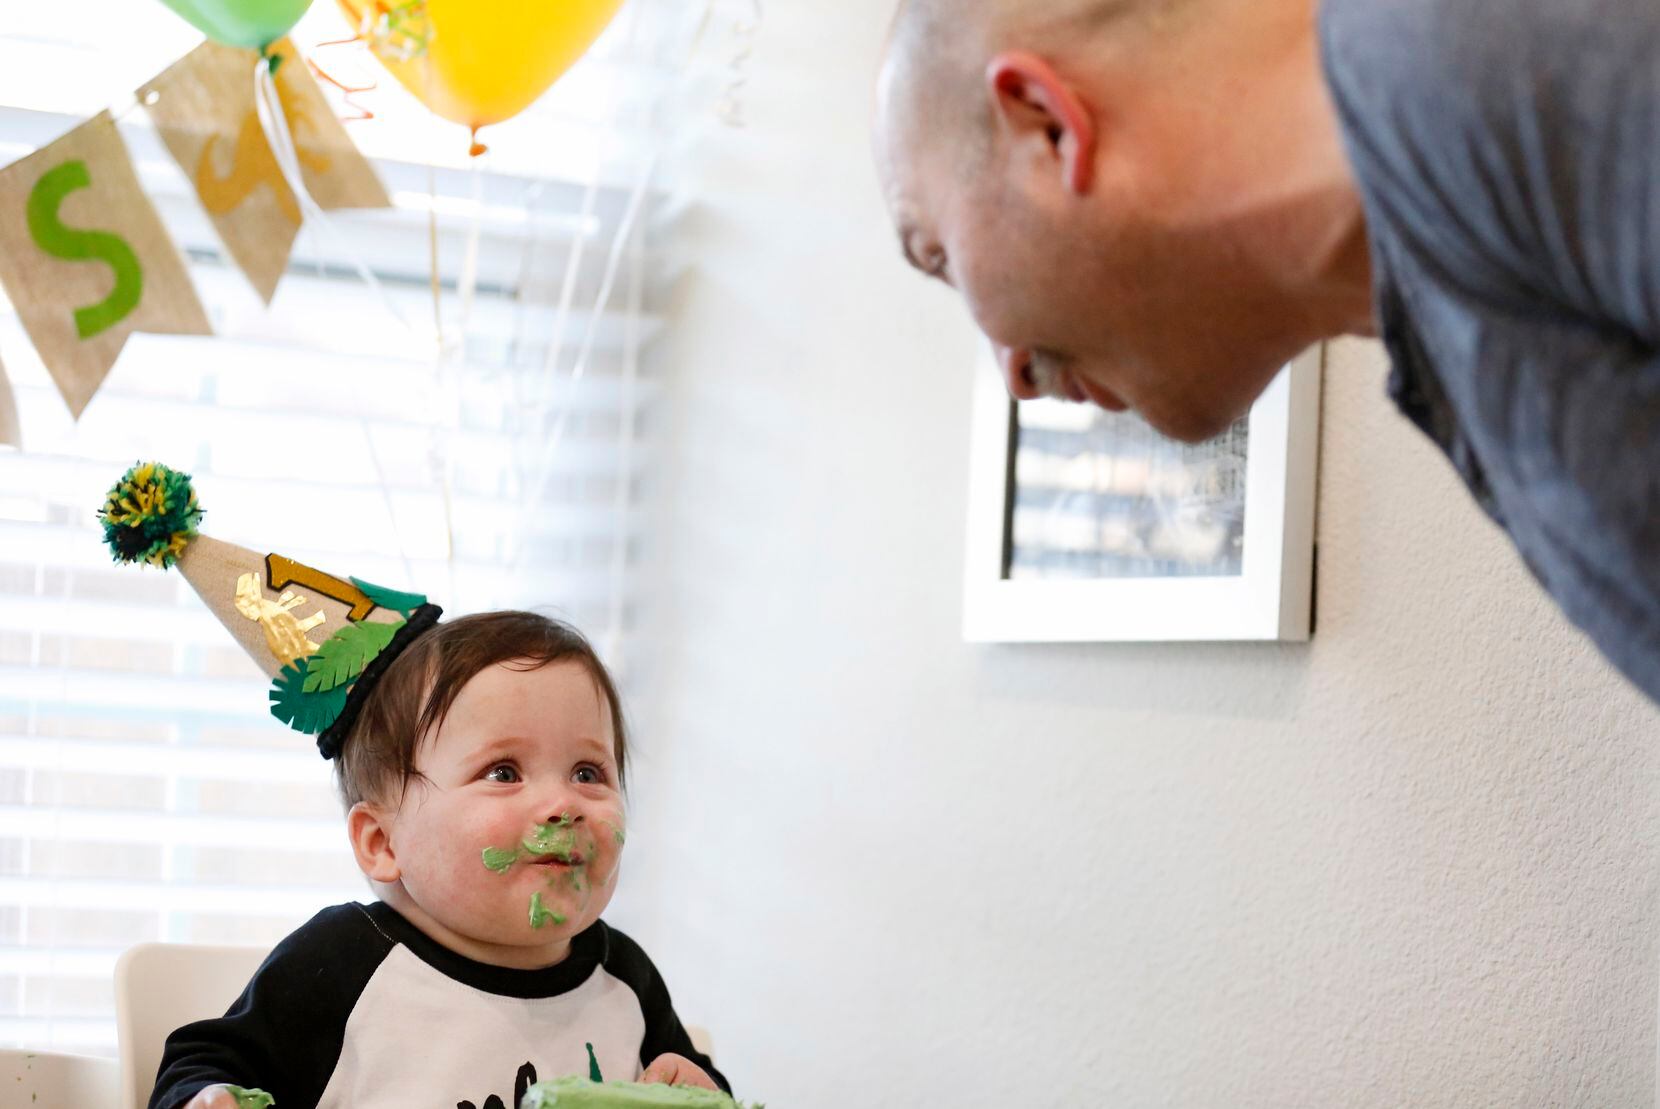 Hudson smiled at his father, Chris Marr, while having cake at the quads’ first birthday party in March at the family’s home.